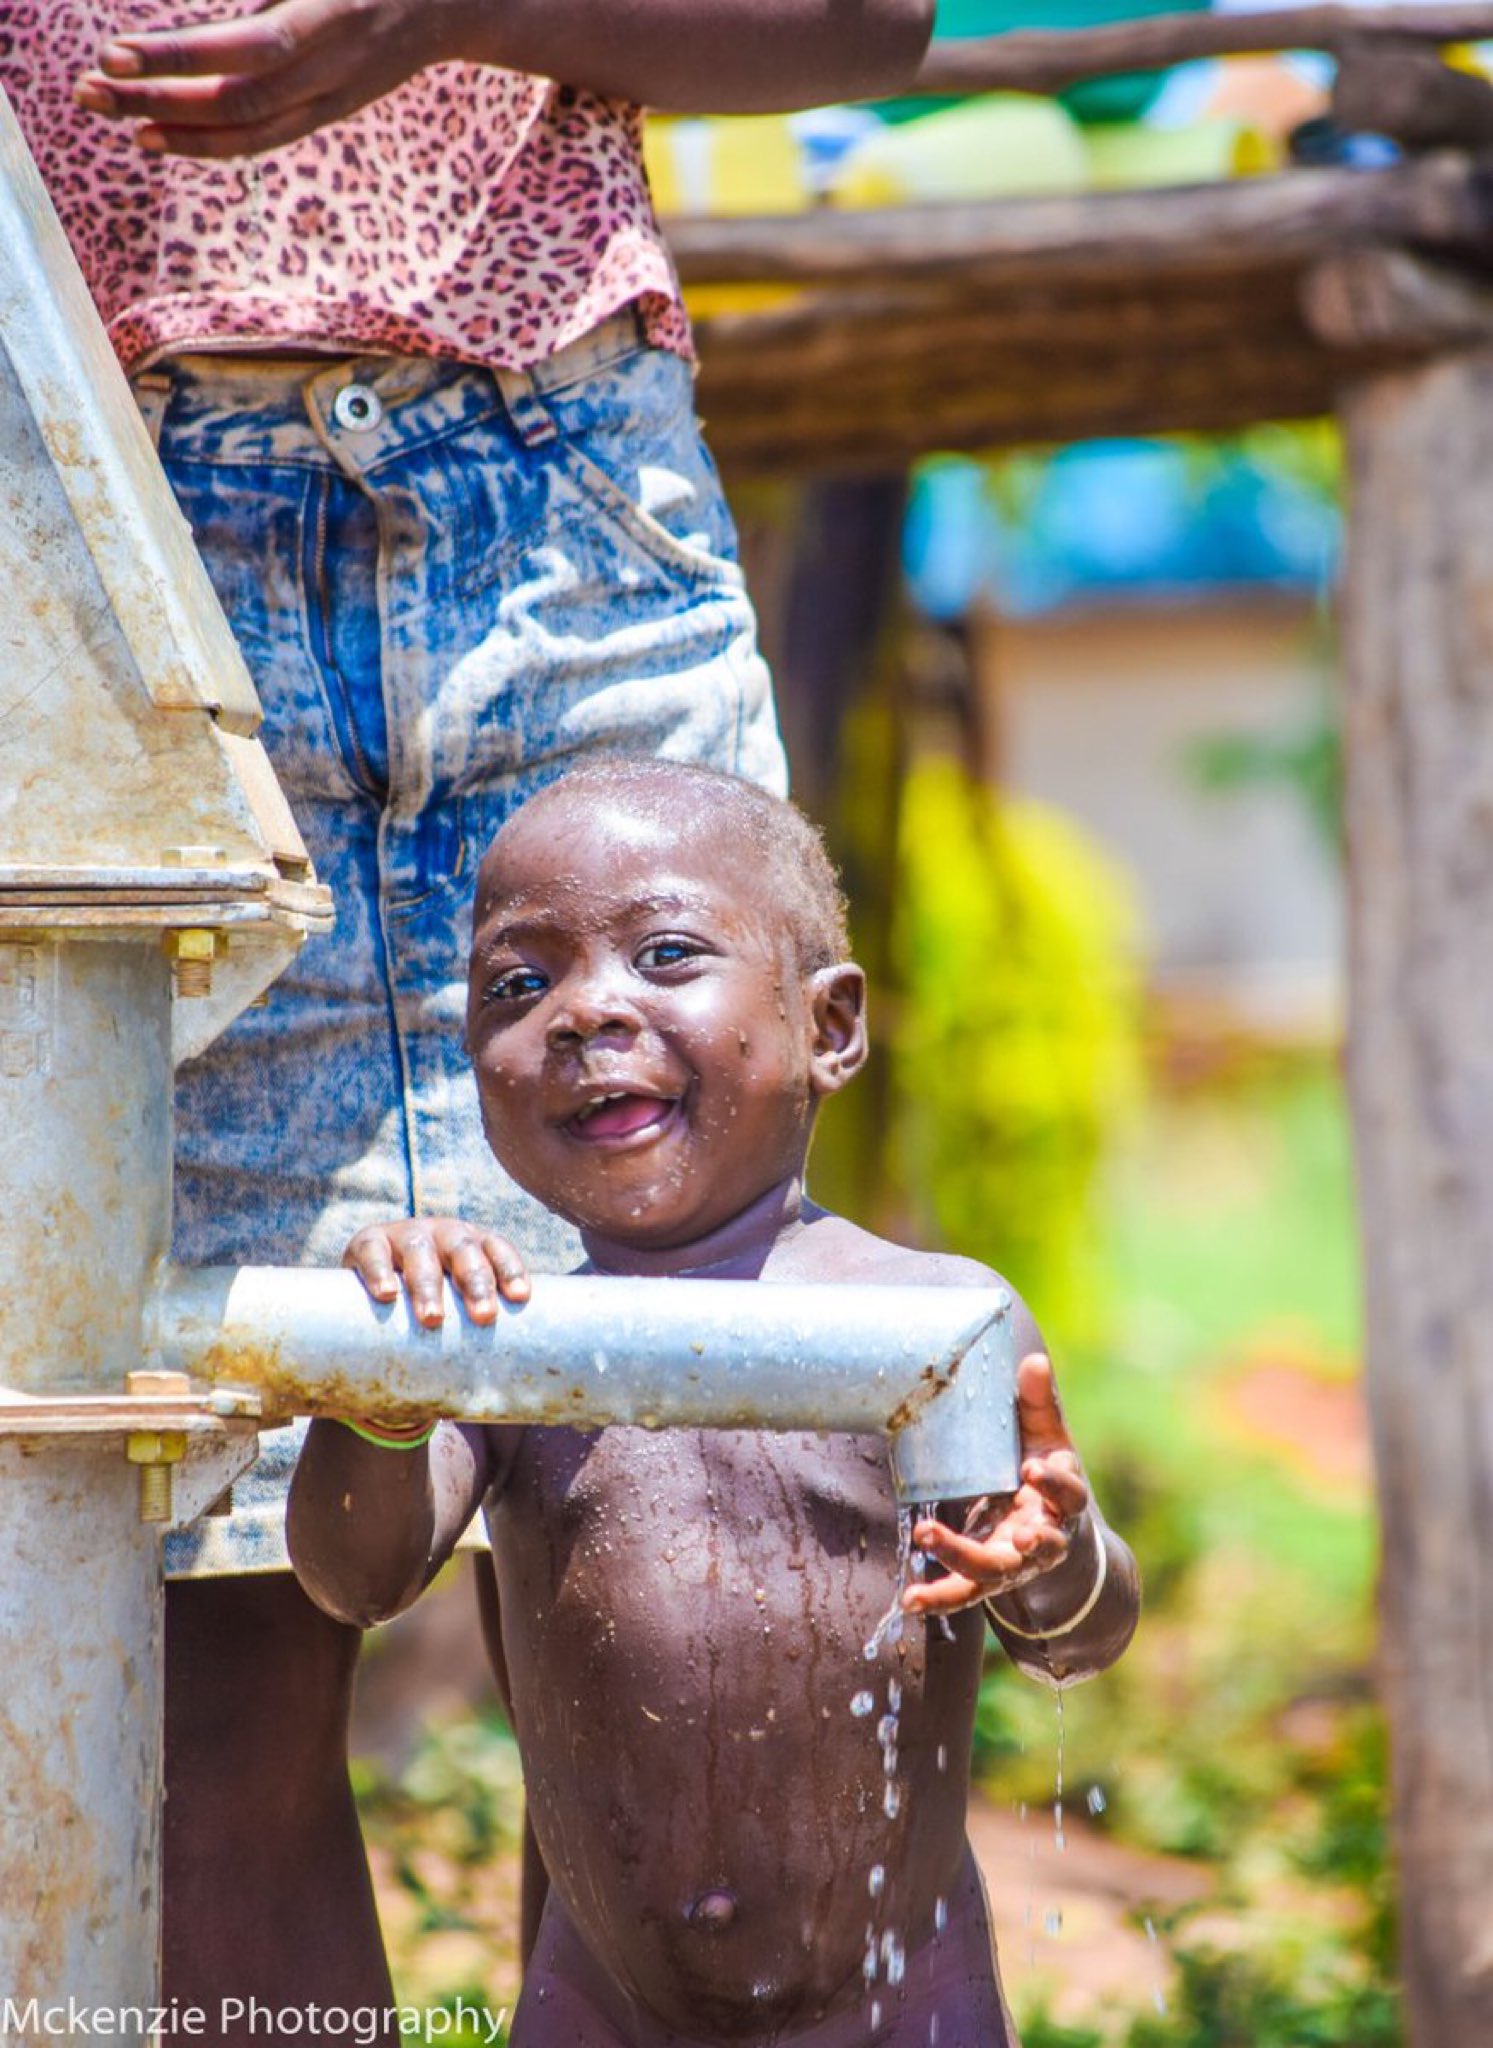 svært sammen dommer File:Young african child playing with water.jpg - Wikimedia Commons